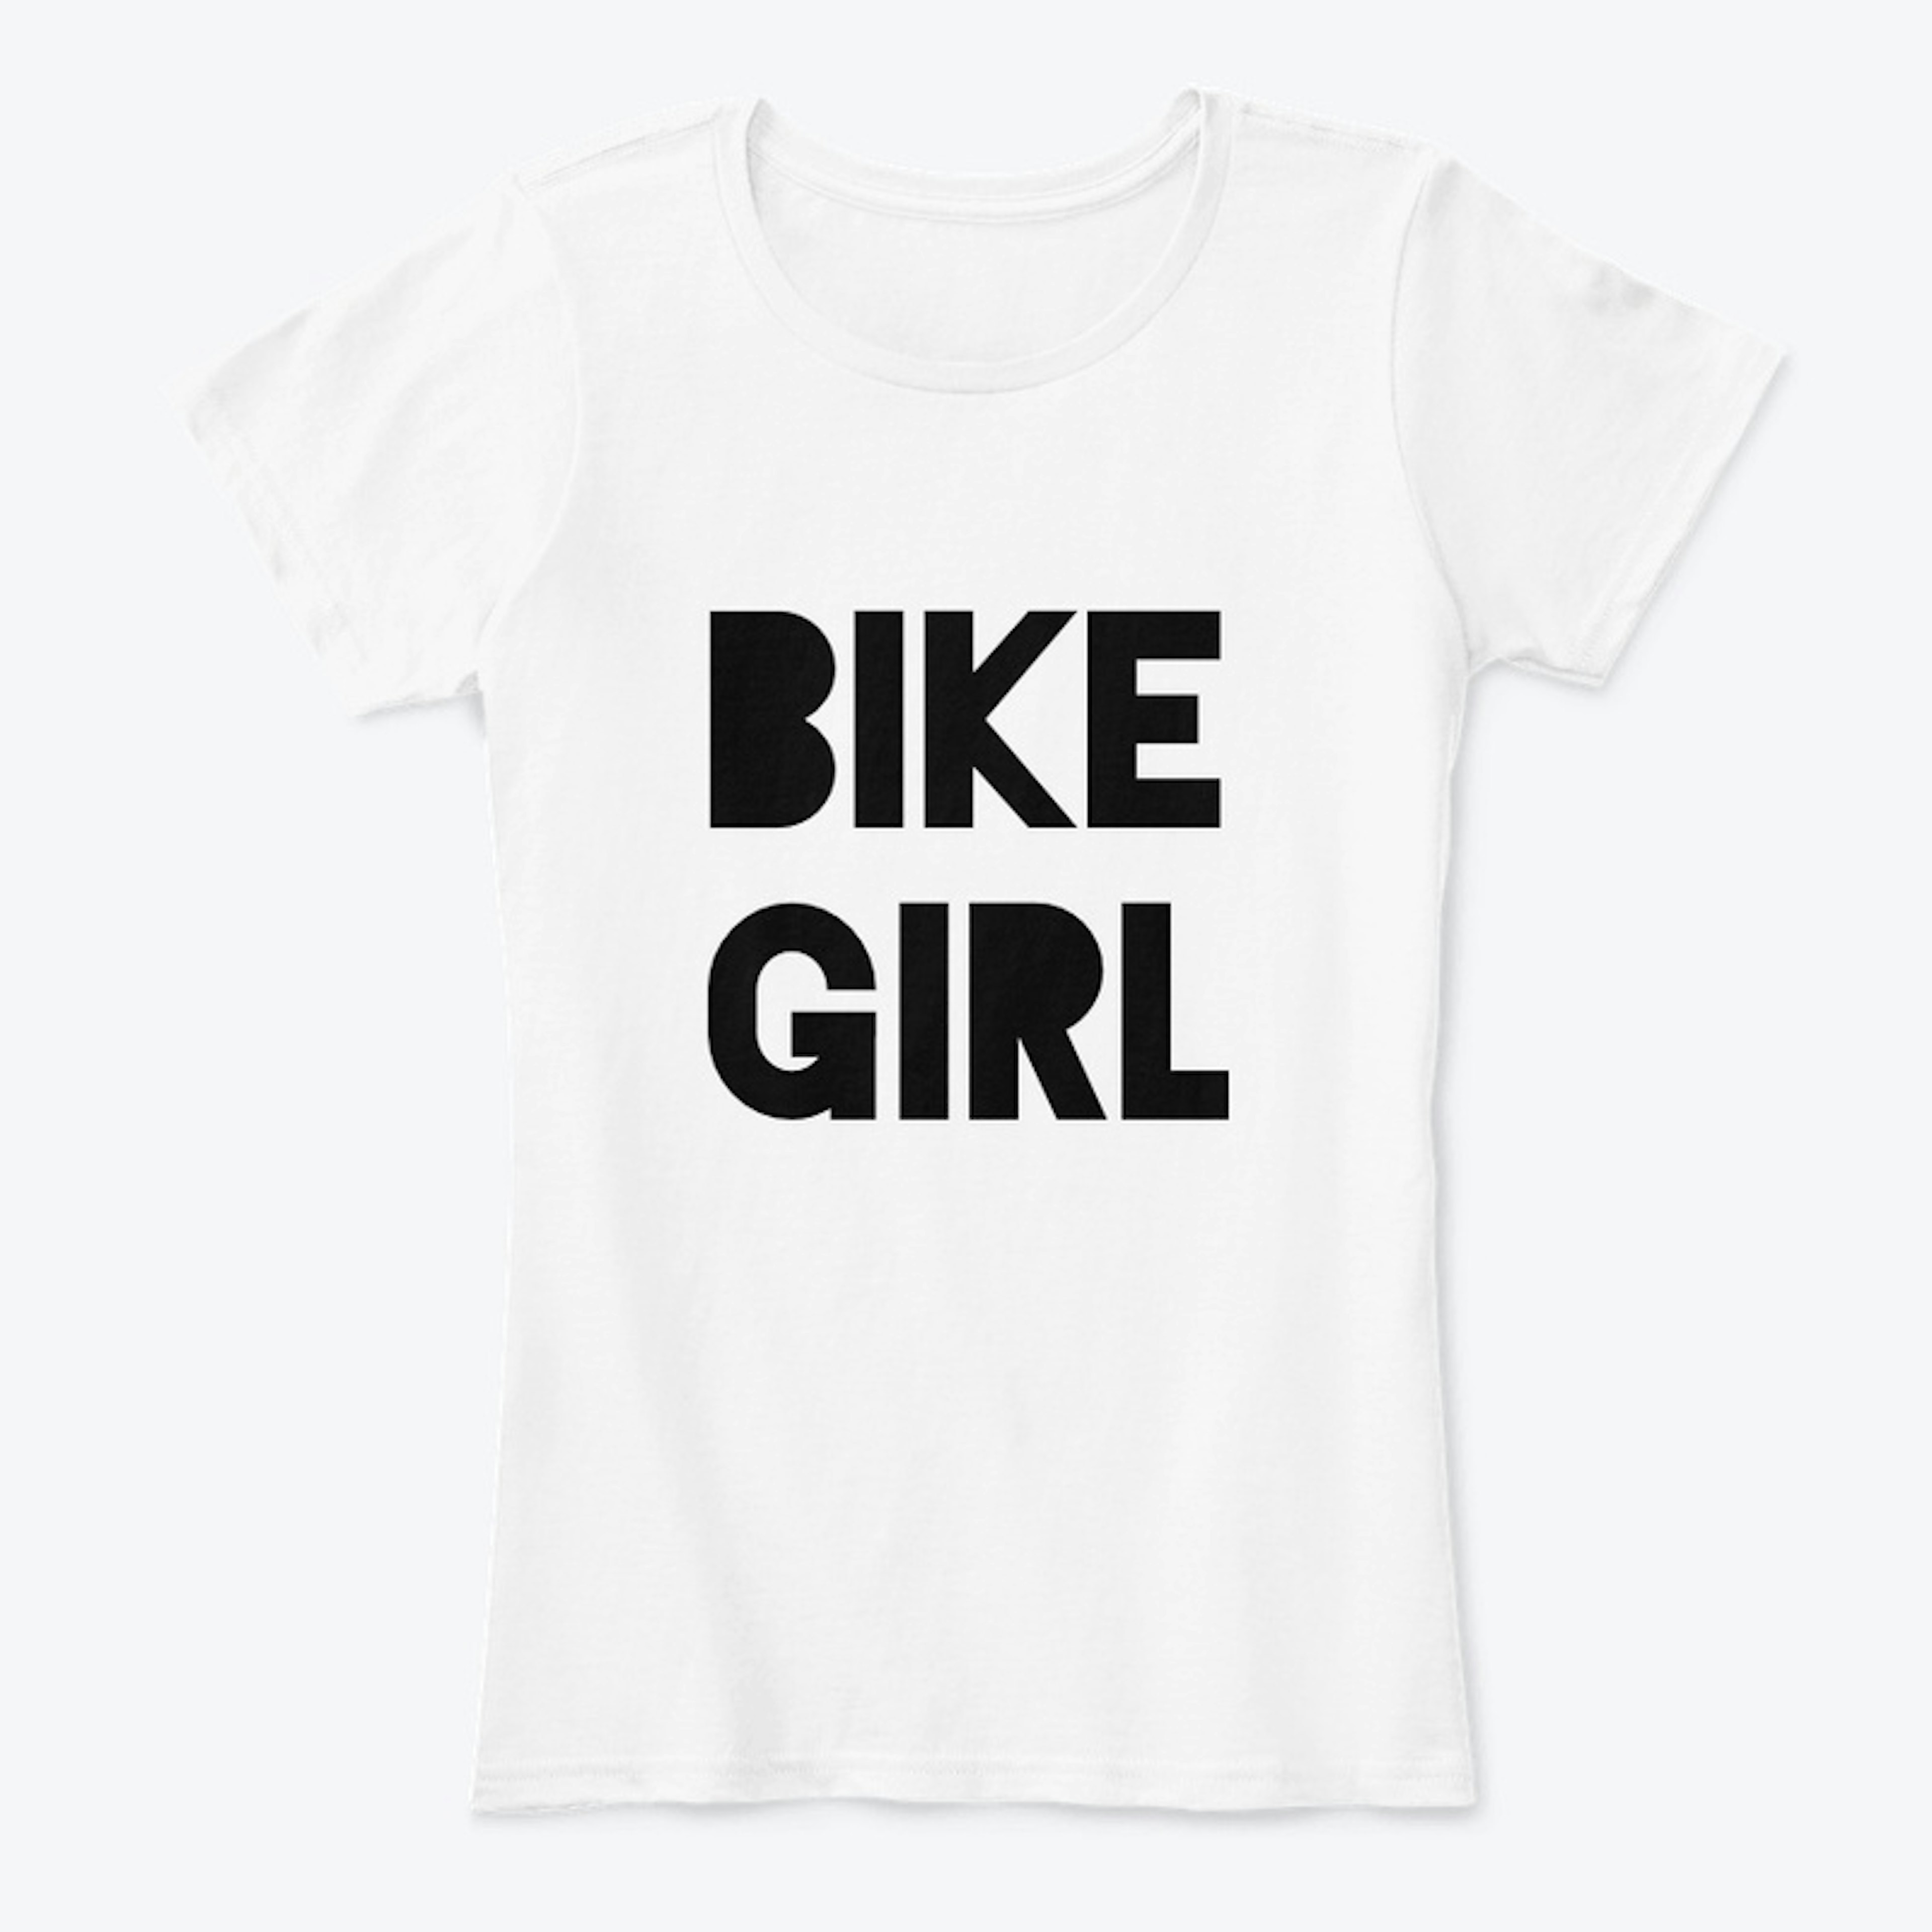 BIKE GIRL (Check out my booty) 